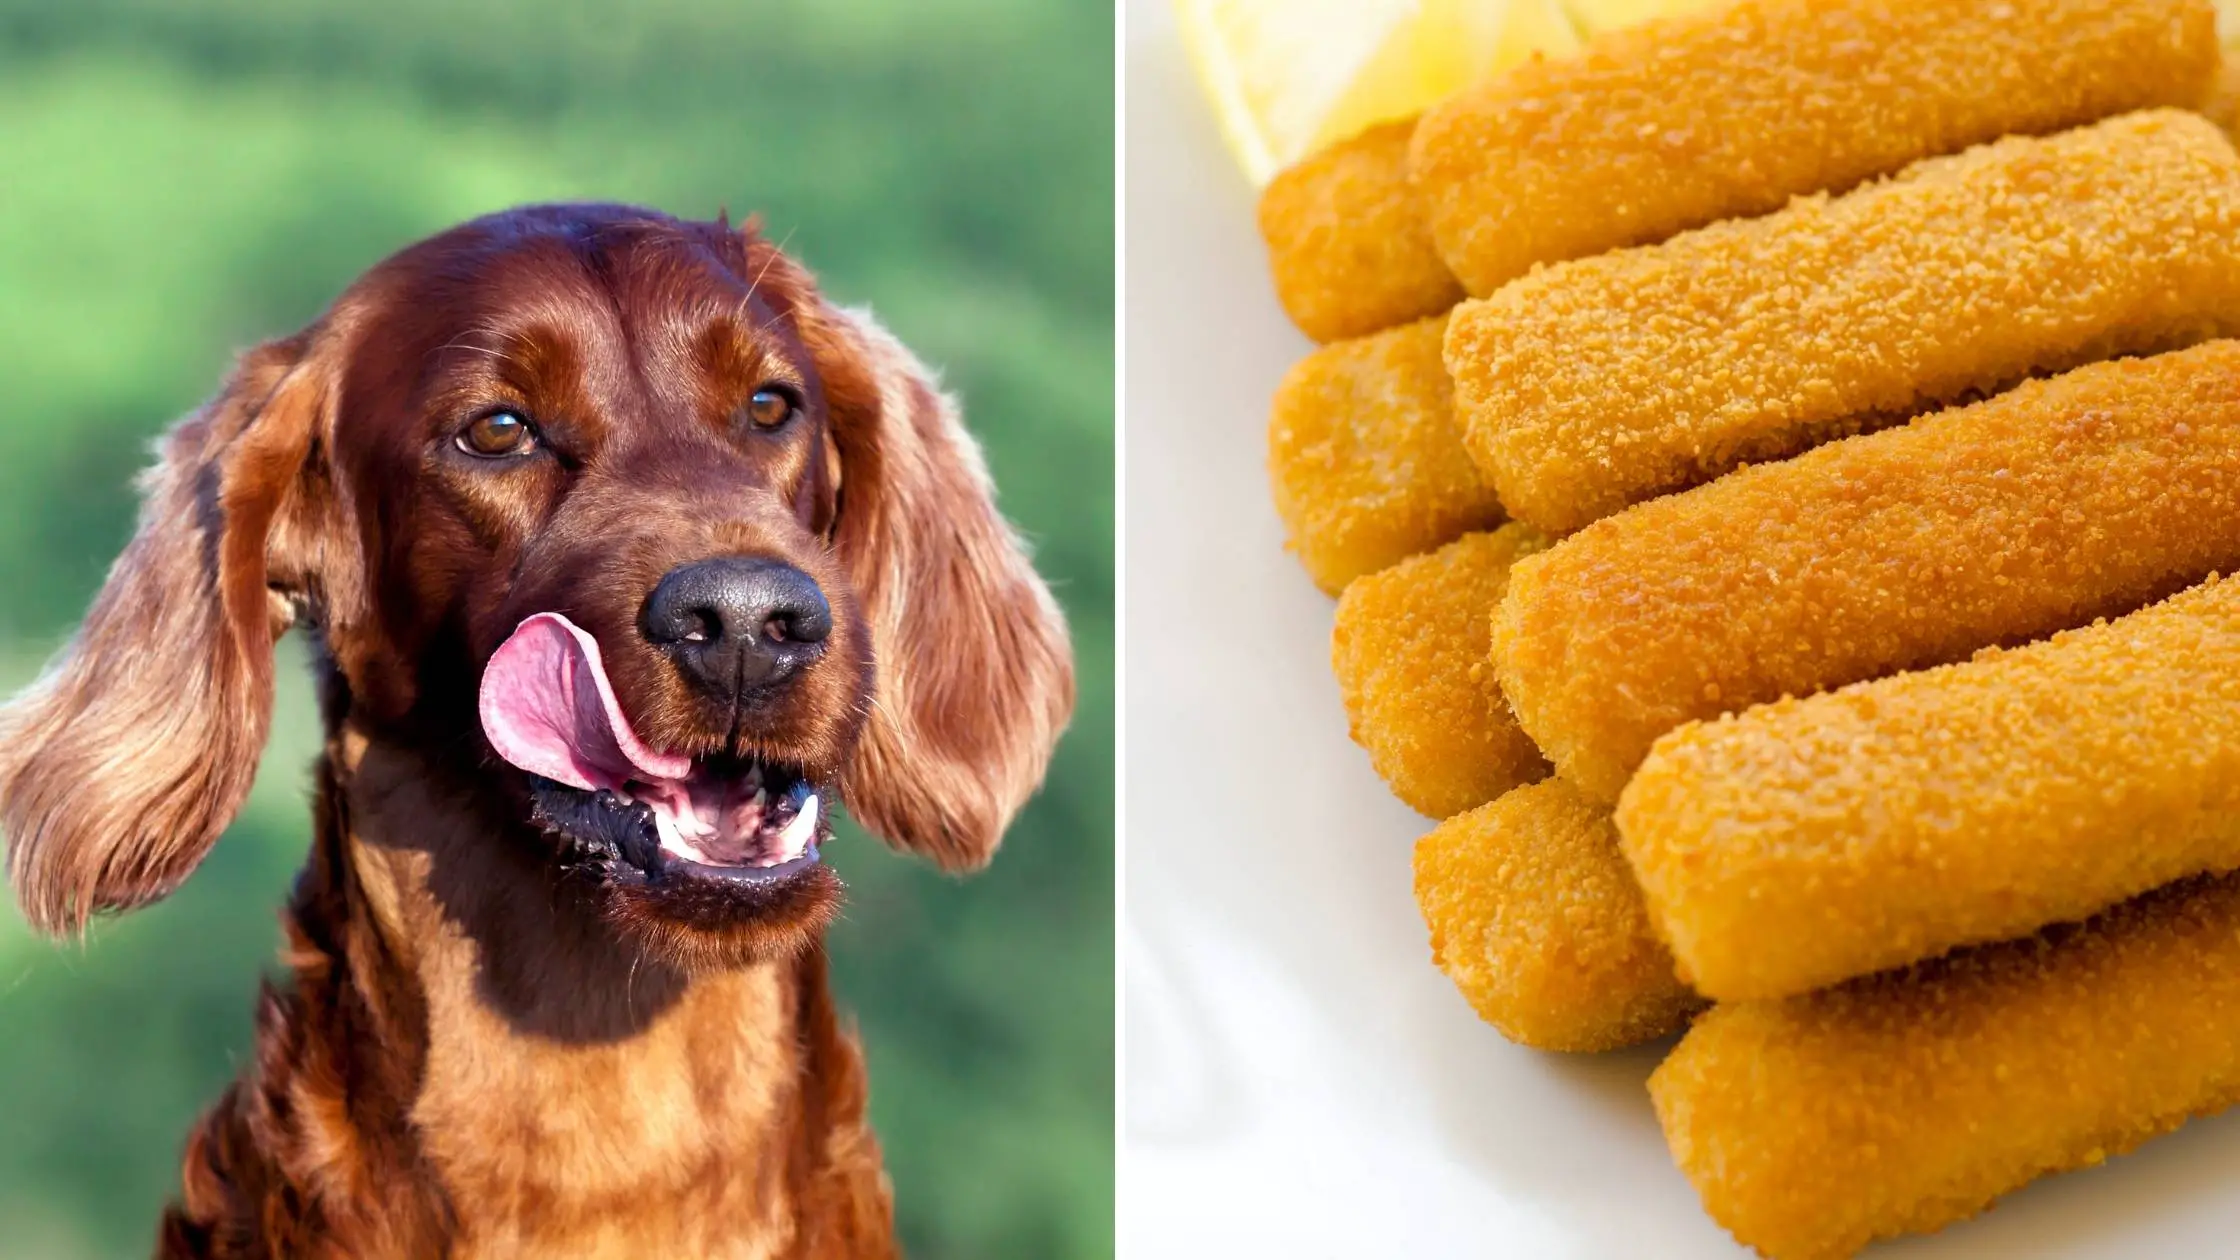 can dogs eat fish sticks